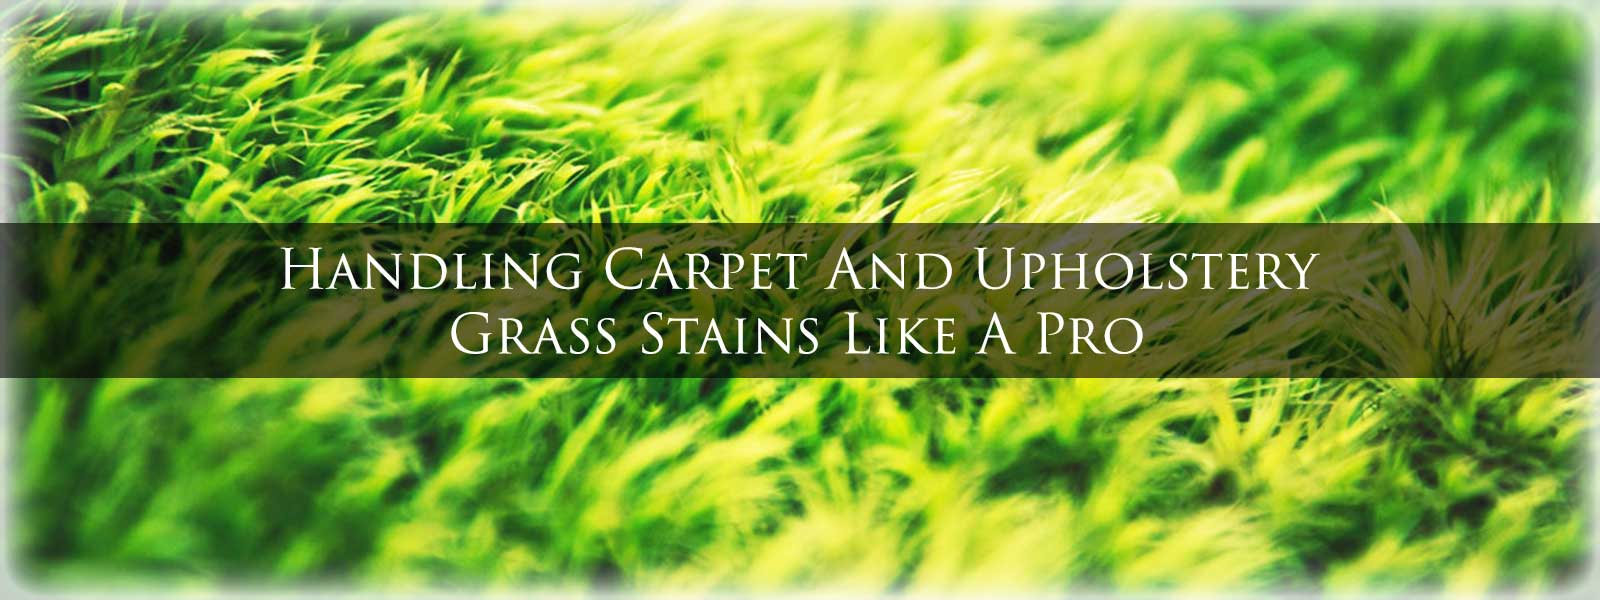 Handling-Carpet-And-Upholstery-Grass-Stains-Like-A-Pro